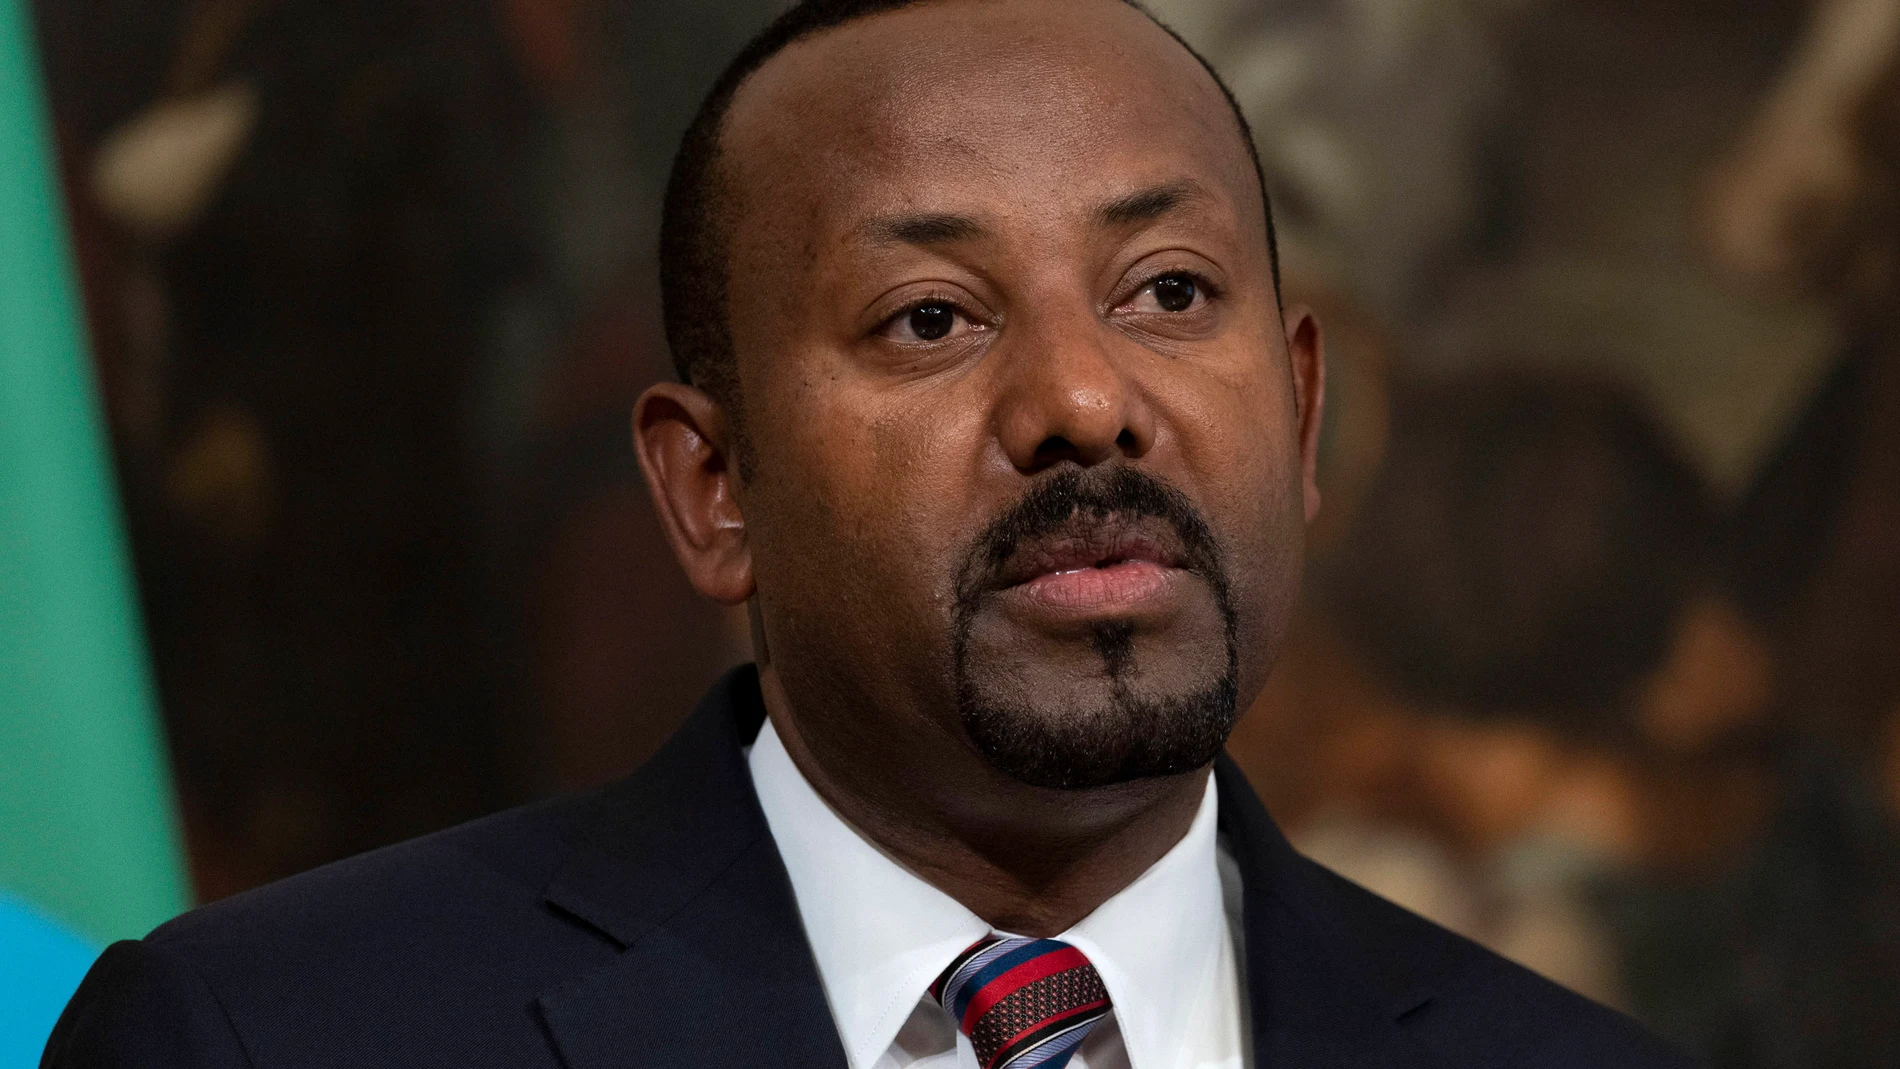 Rome (Italy), 06/02/2023.- Ethiopia's Prime Minister and Nobel Peace Prize laureate Abiy Ahmed Ali attends a joint press conference with the Prime Minister of Italy (not pictured) at the end of their meeting, at Chigi Palace in Rome, Italy, 06 February 2023. (Etiopía, Italia, Roma) EFE/EPA/MASSIMO PERCOSSI 